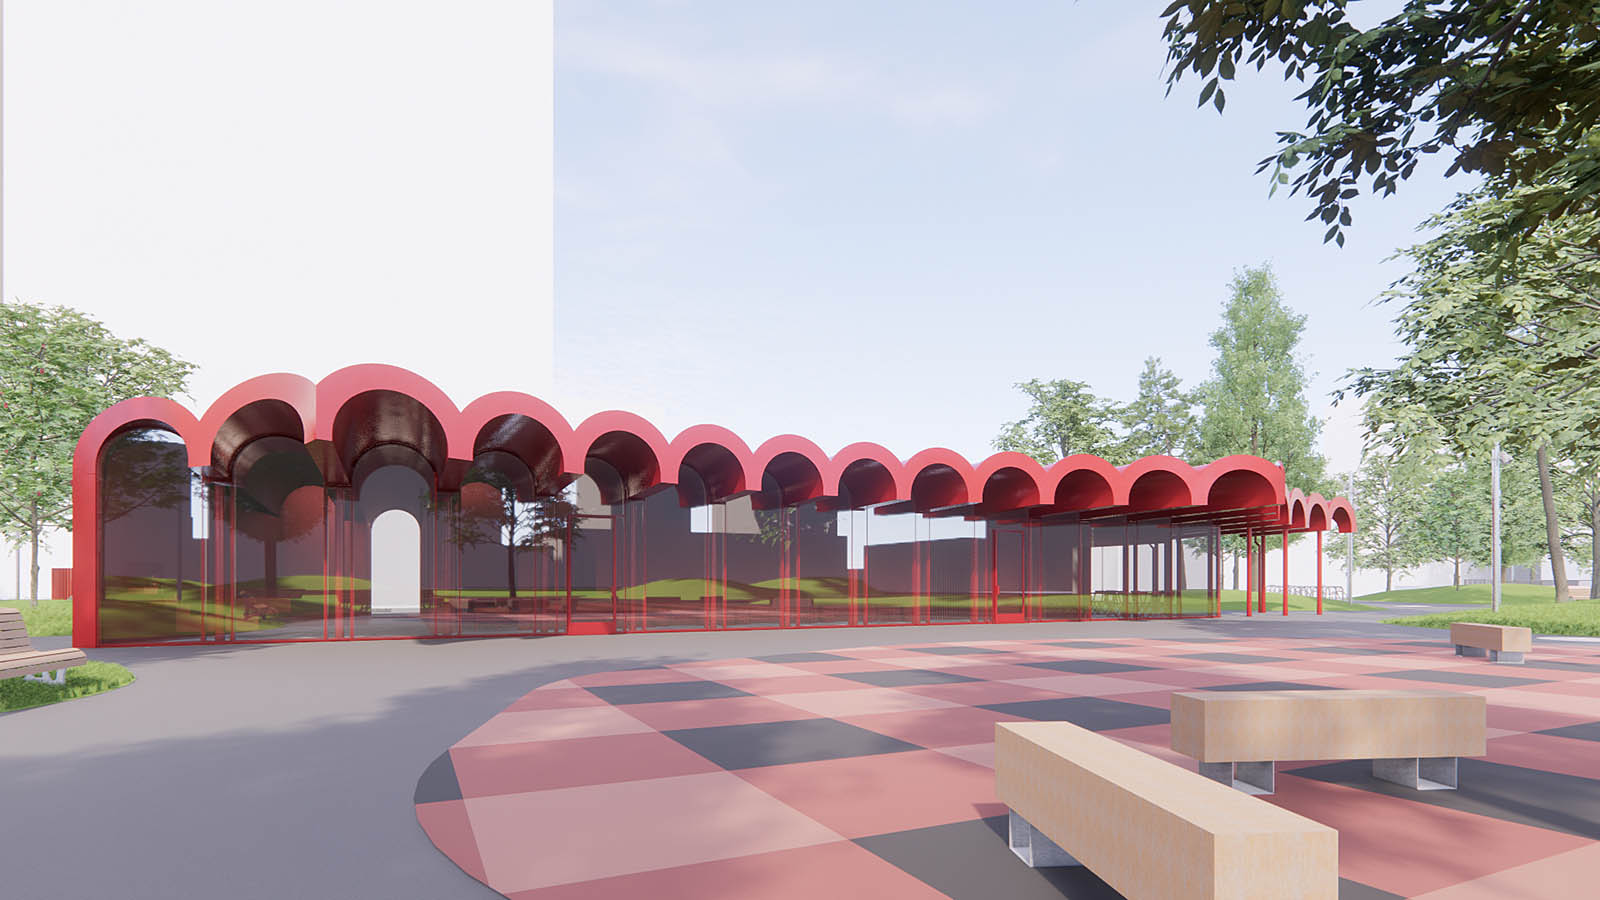 An artistic rendering of the proposed design for the Warehouse Park pavilion